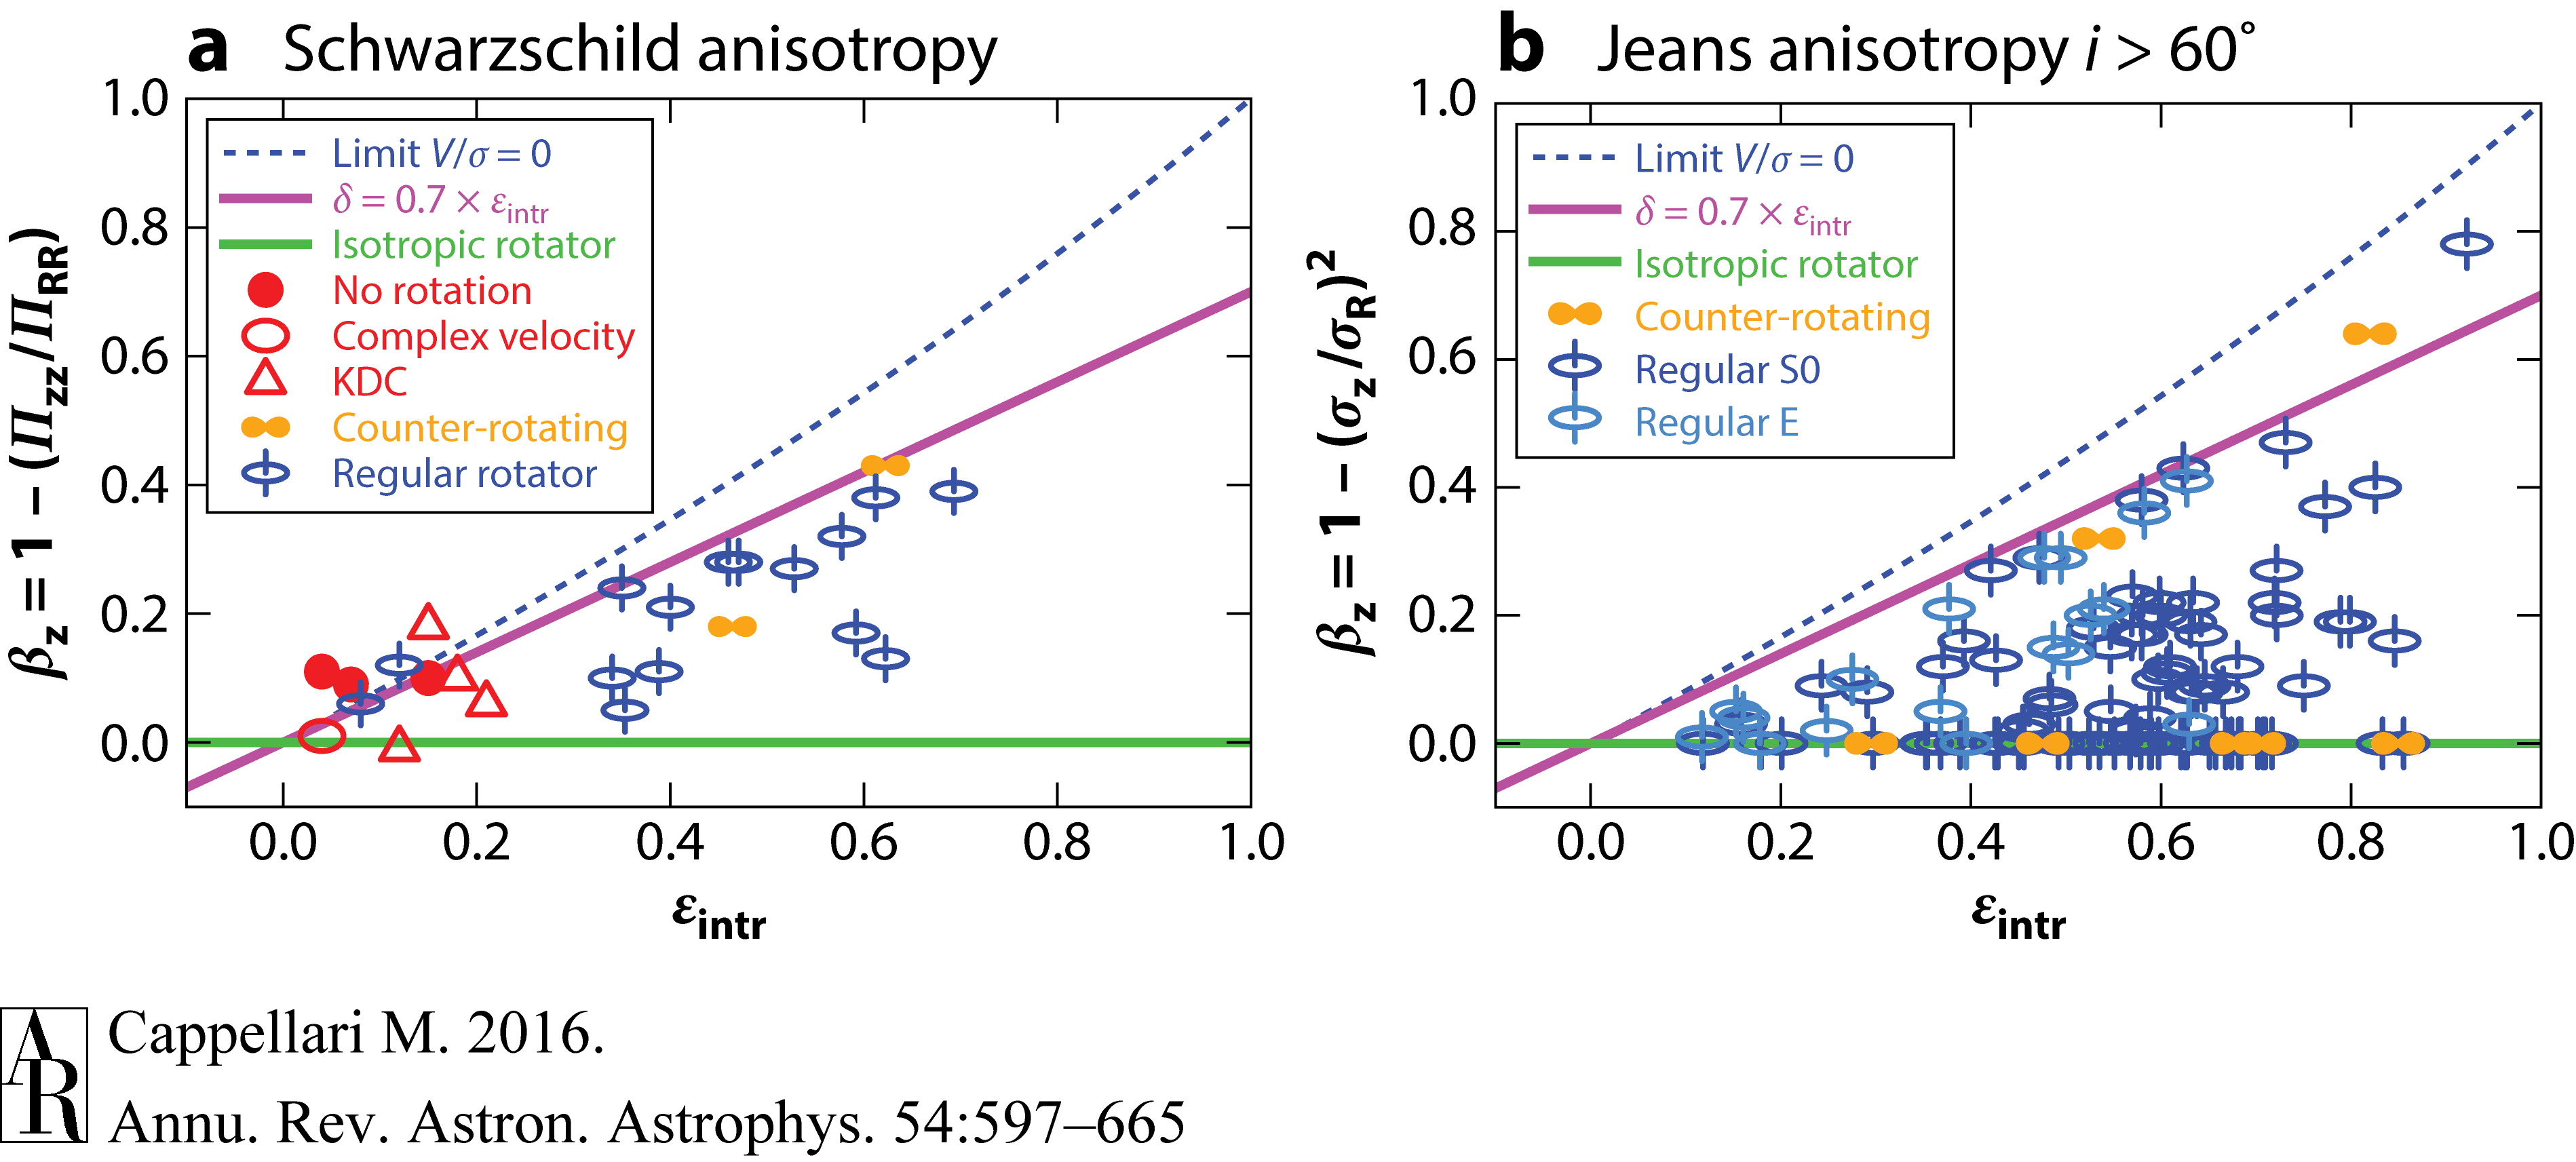 Orbital anisotropy vs. intrinsic ellipticity from Schwarzschild (left) and Jeans (right) modeling (Cappellari 2016)